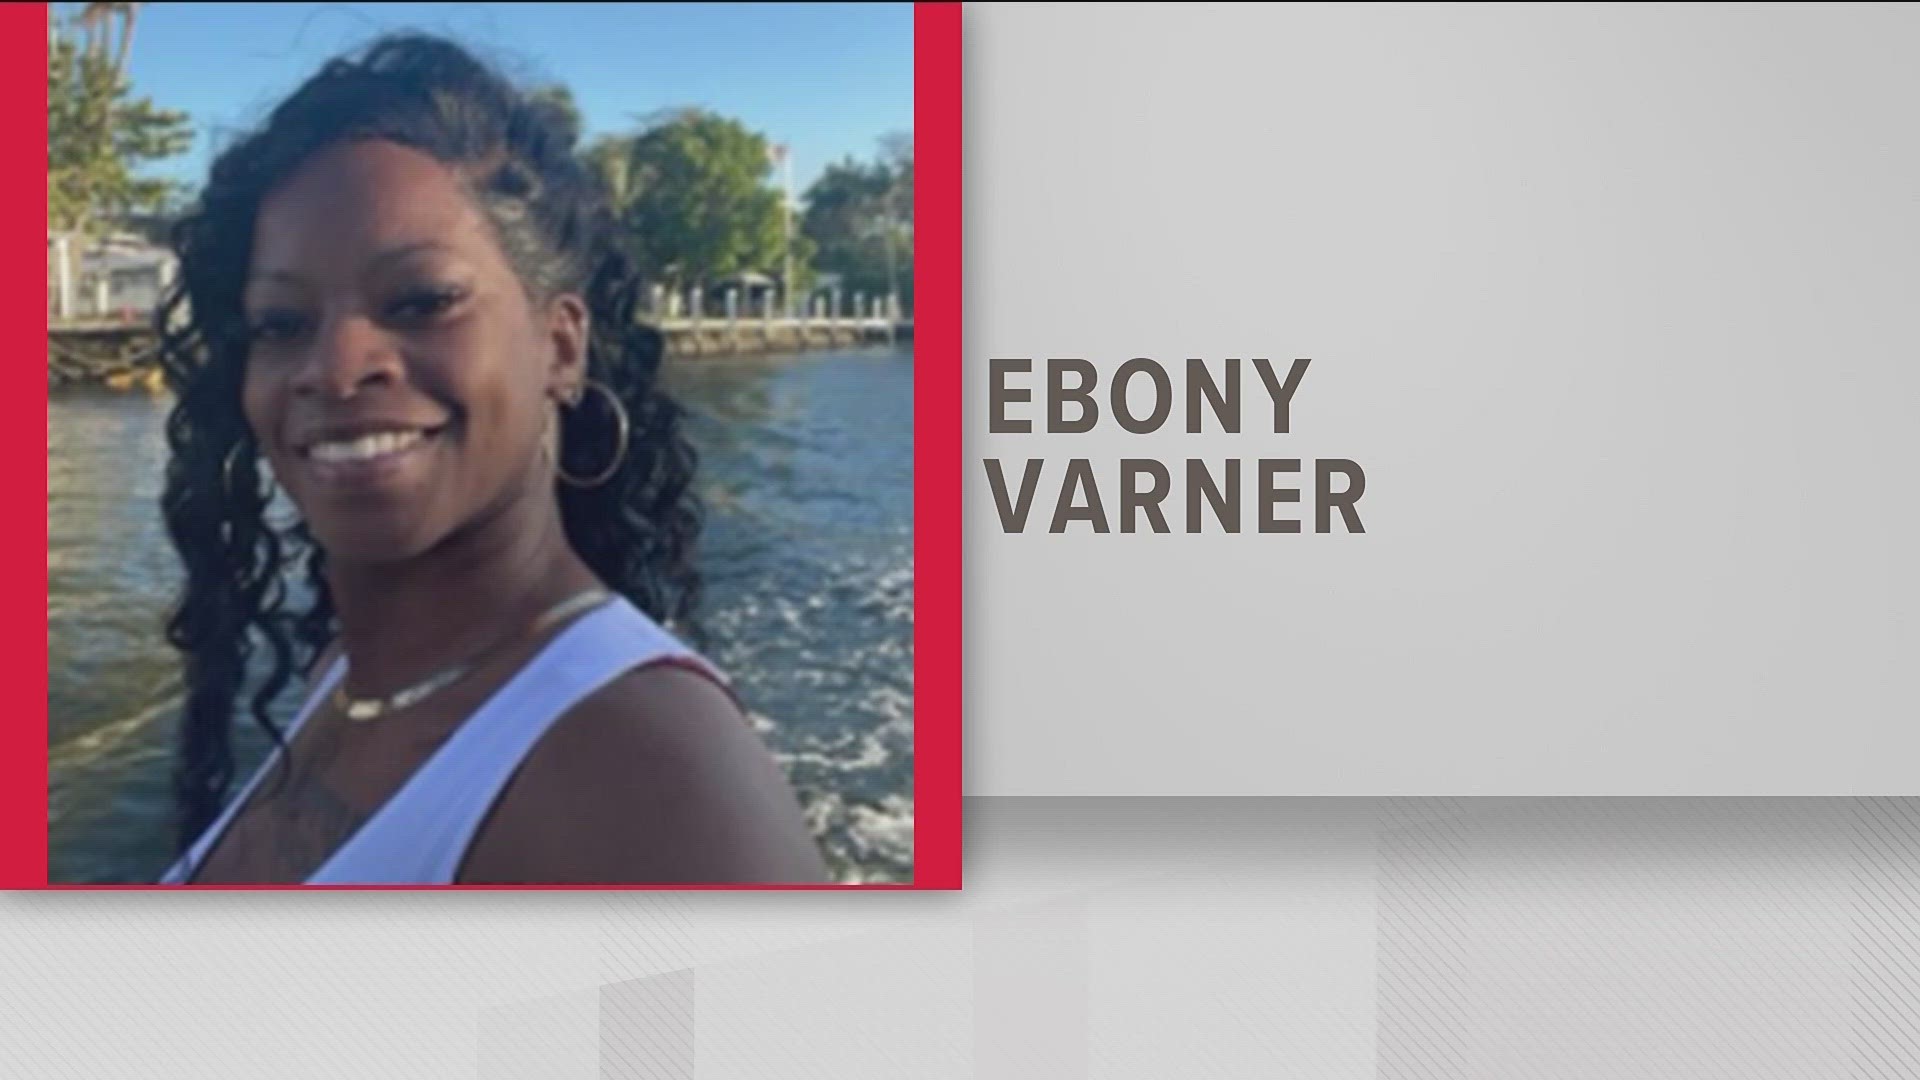 According to the GBI, Ebony Varner was last seen around 9:20 a.m. on Saturday in the area of Peachtree Industrial Boulevard and I-285.